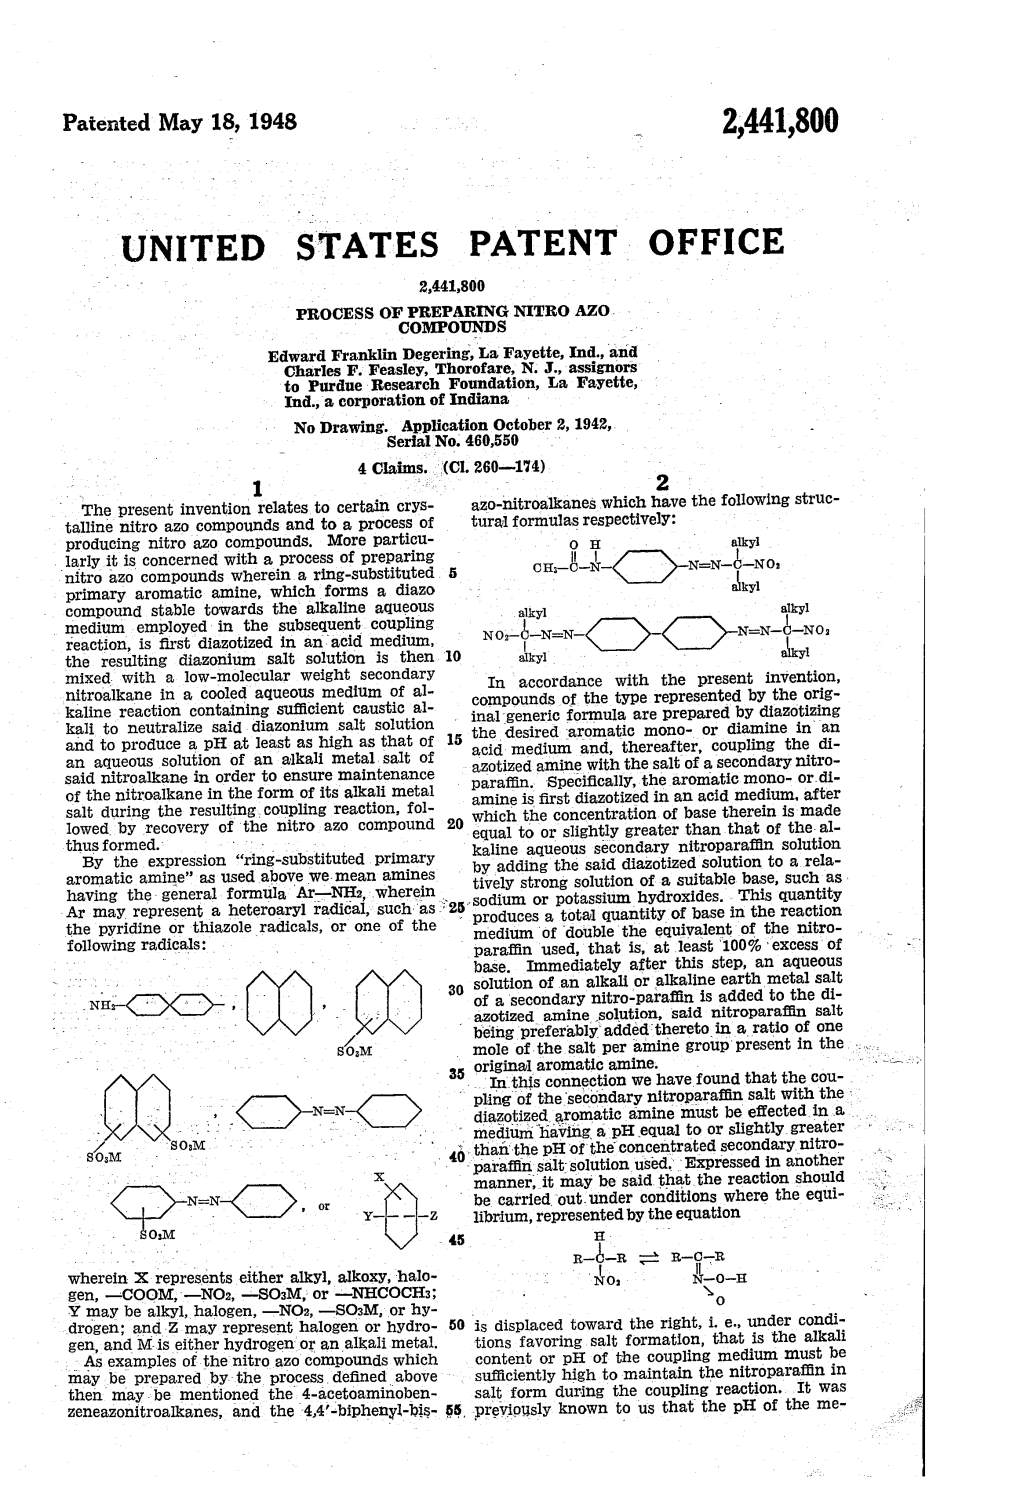 UNITED STATES PATENT OFFICE Process of PREPARING Nitro Azo Compounds Edward Franklin Degering, La Fayette, Ind., and Charles F